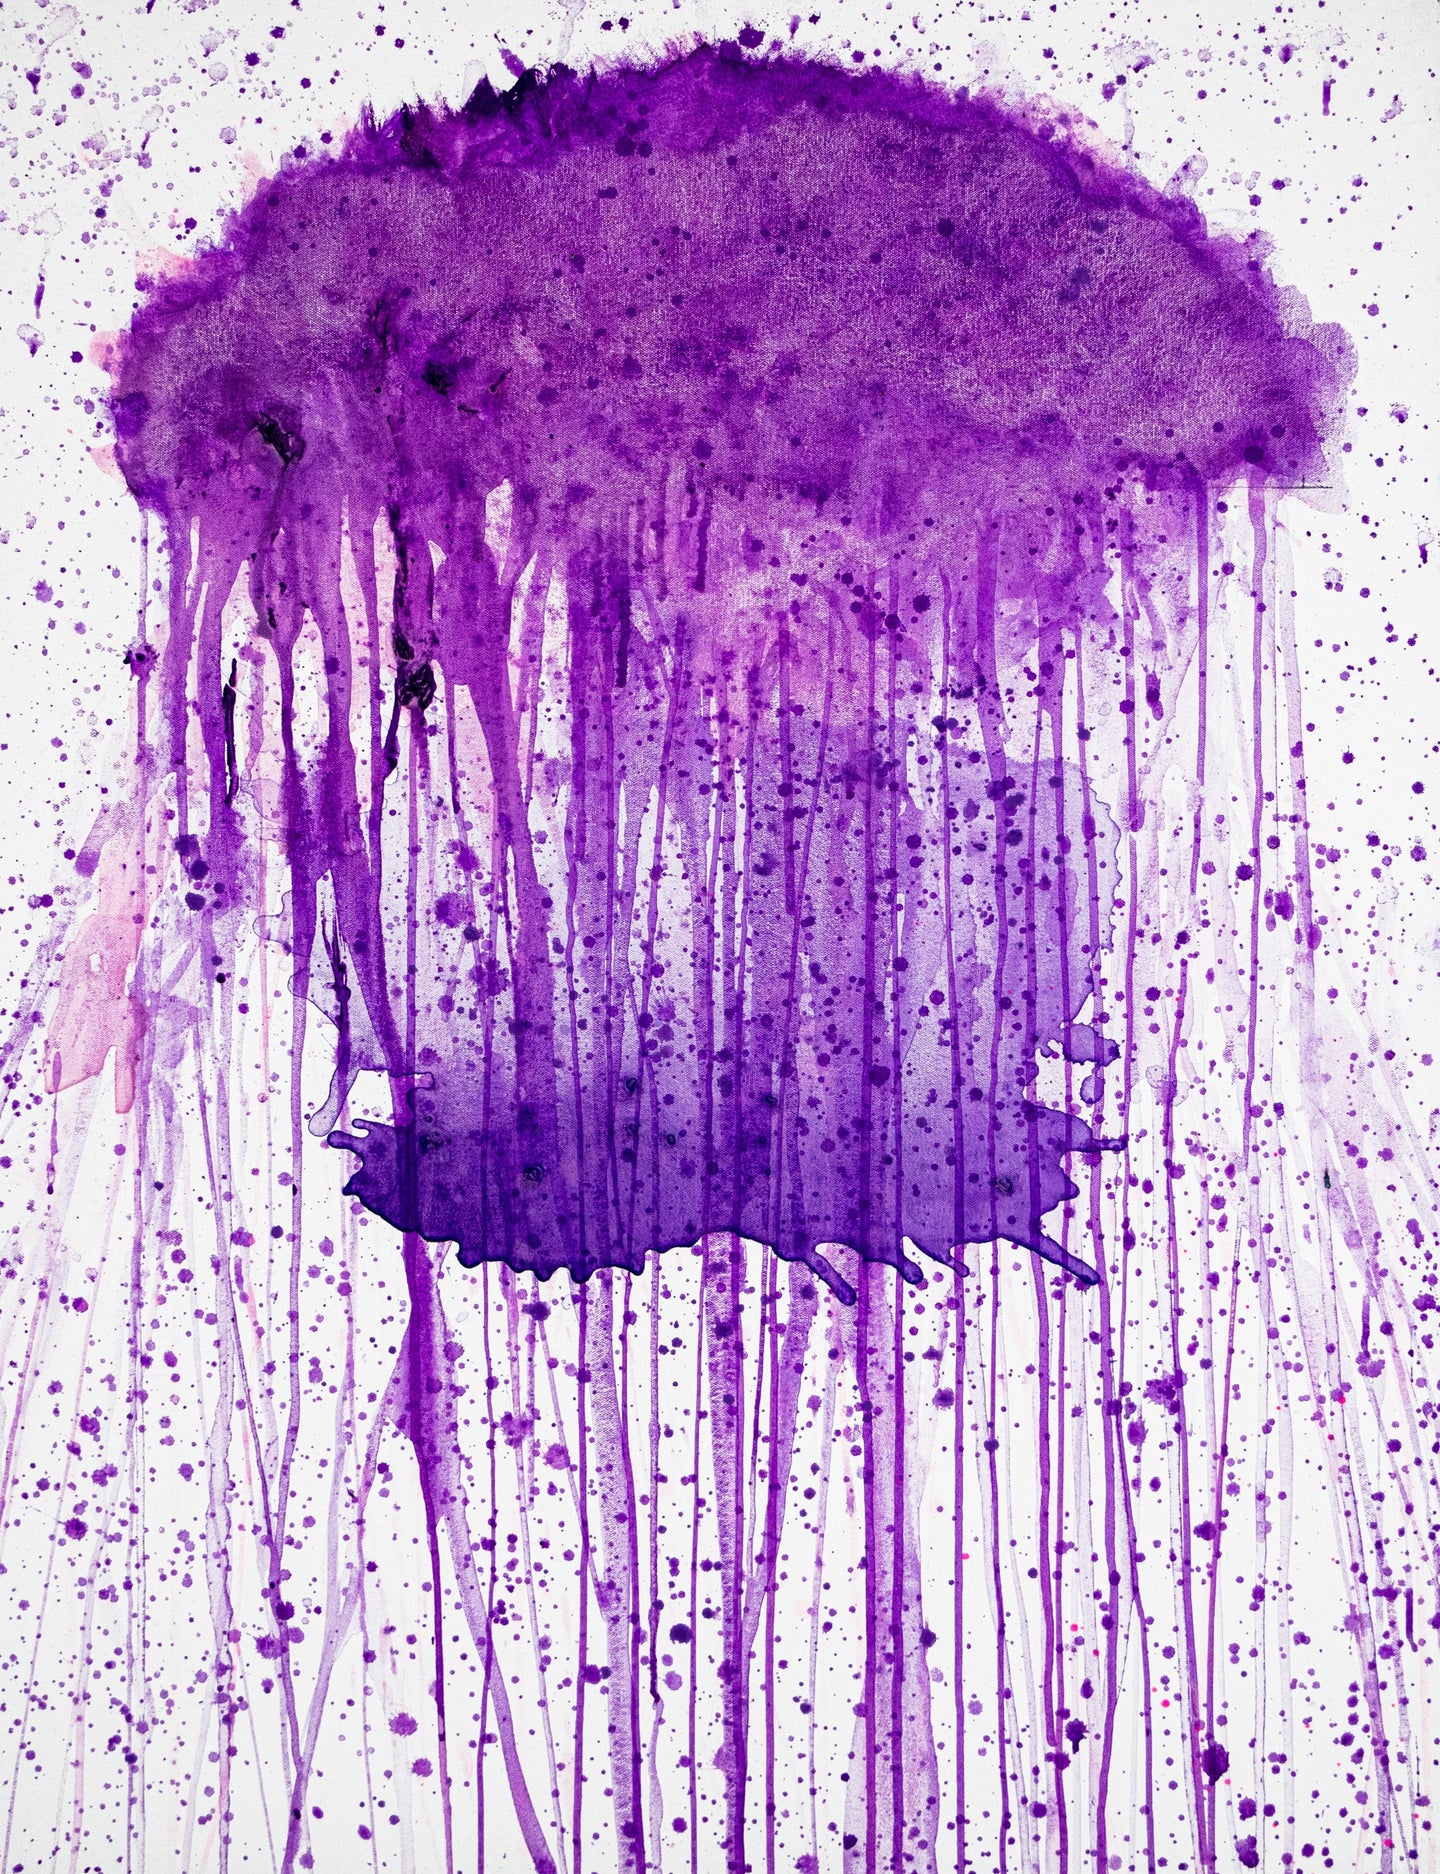 J. Steven Manolis,  Jellyfish (Violet), 2020, 40 x 30 inches, Acrylic painting on Canvas, Acrylic Jellyfish painting, Abstract expressionism art for sale at Manolis Projects Art Gallery, Miami, Fl